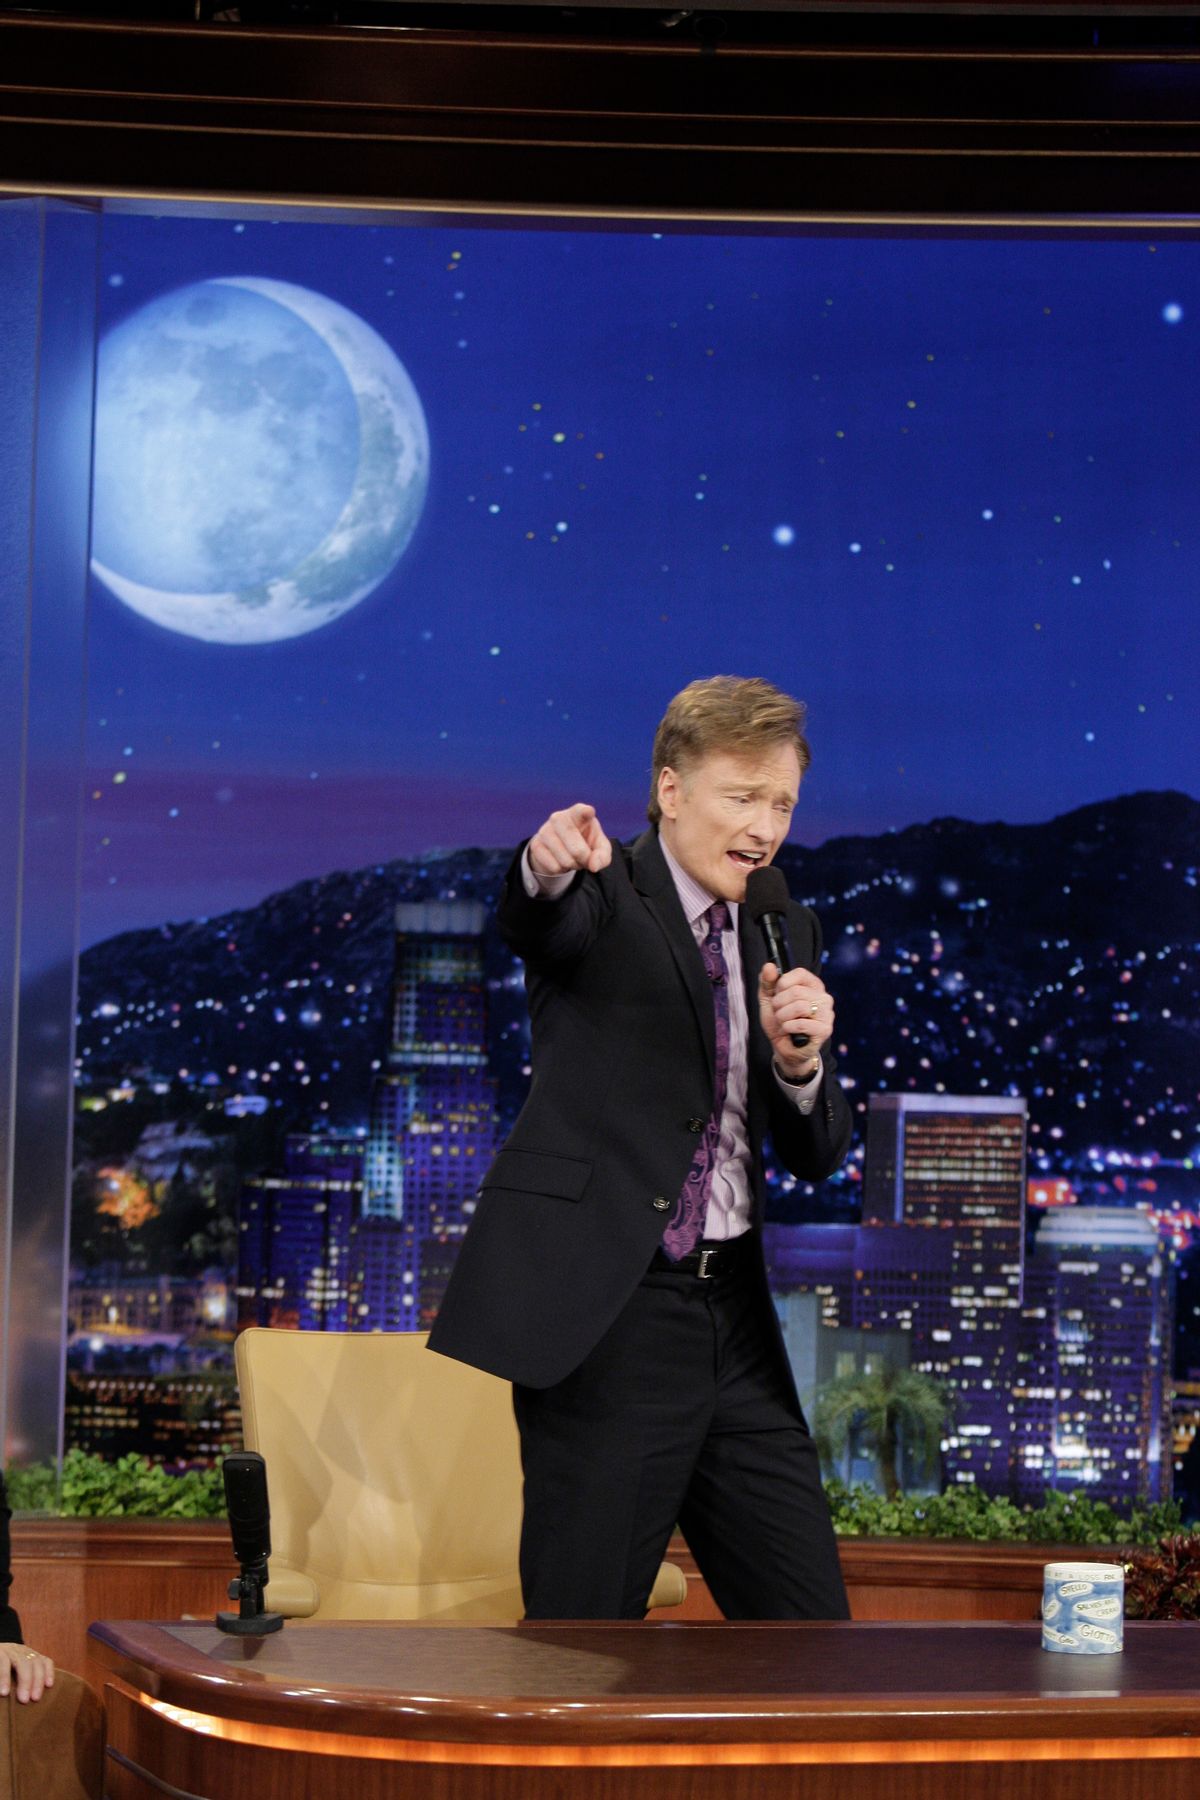 THE TONIGHT SHOW WITH CONAN O'BRIEN -- Episode 140 -- Pictured: Host Conan O'Brien on January 14, 2010 (Photo by: Paul Drinkwater/NBCU Photo Bank via AP Images)  (Associated Press)